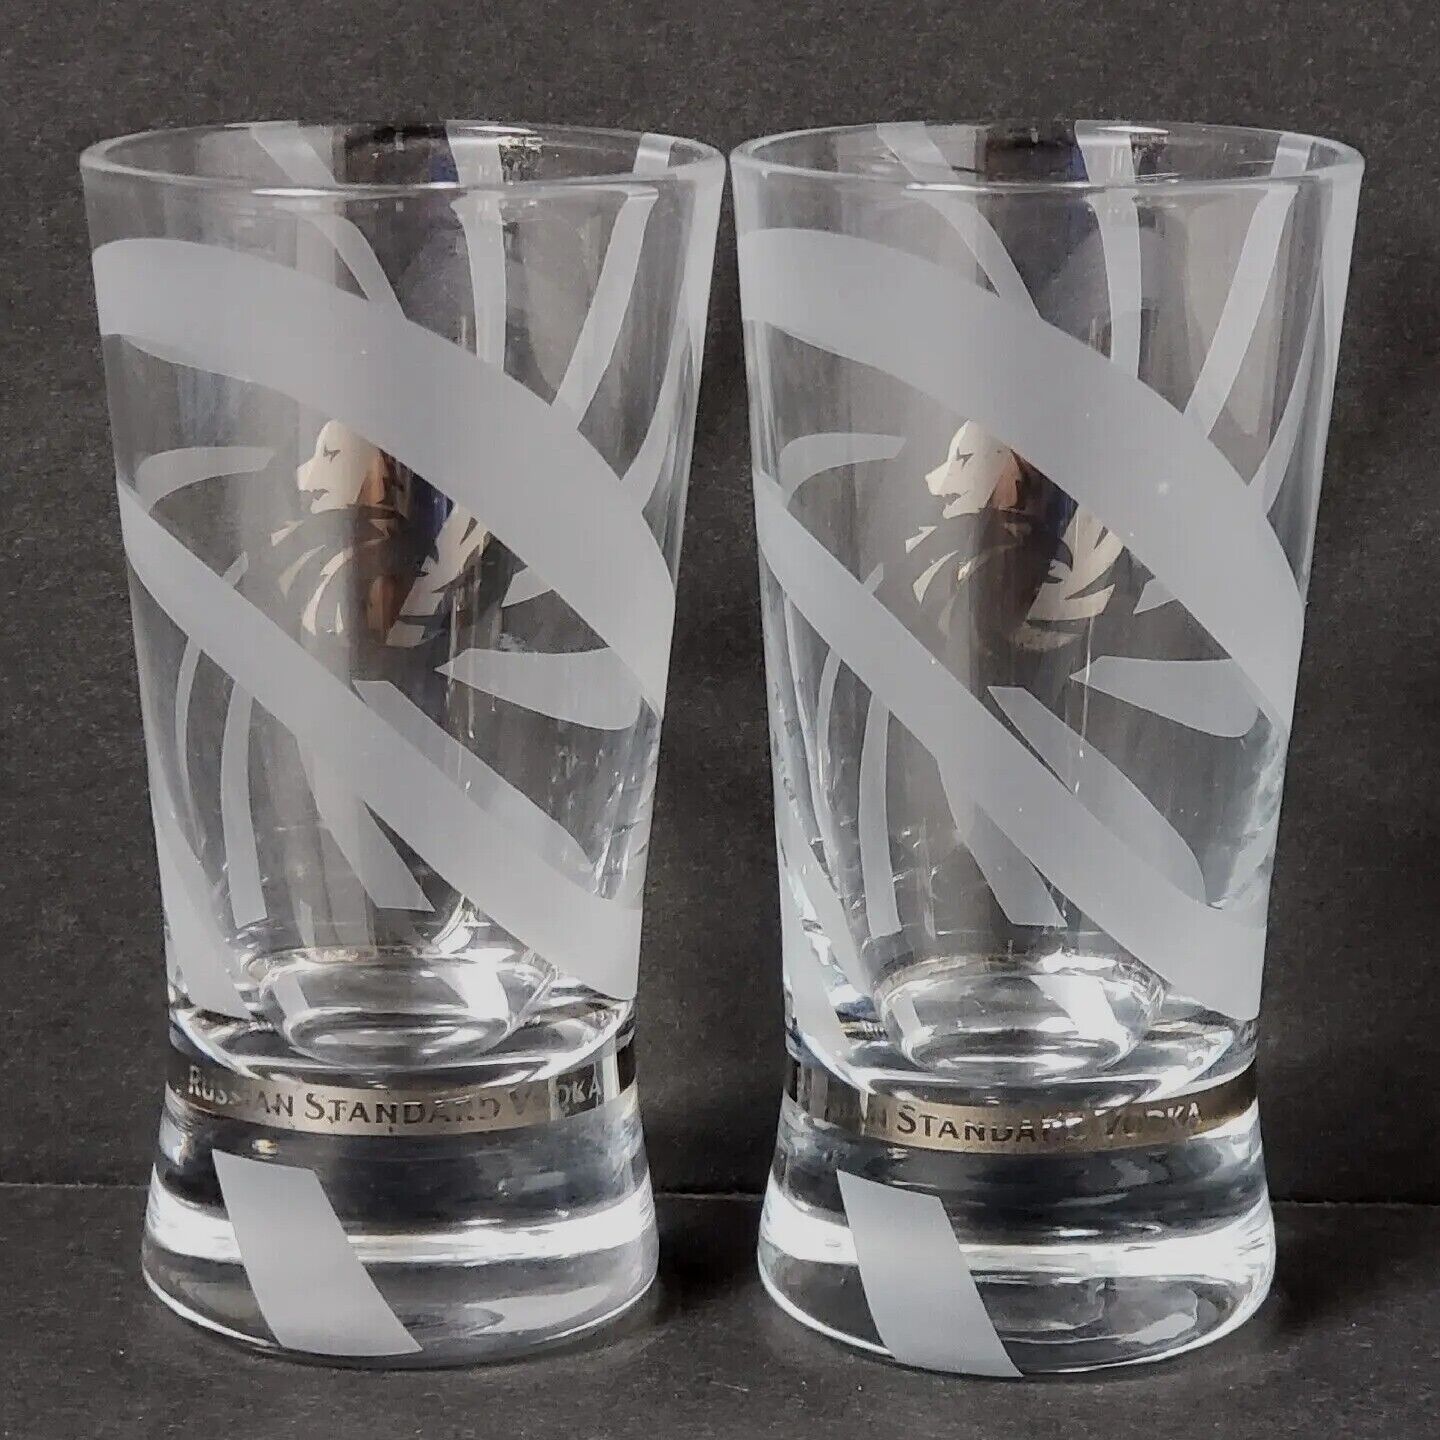 Russian Standard Vodka 1.5 oz. Shot Glass Clear with Frosted Swirls Set of 2